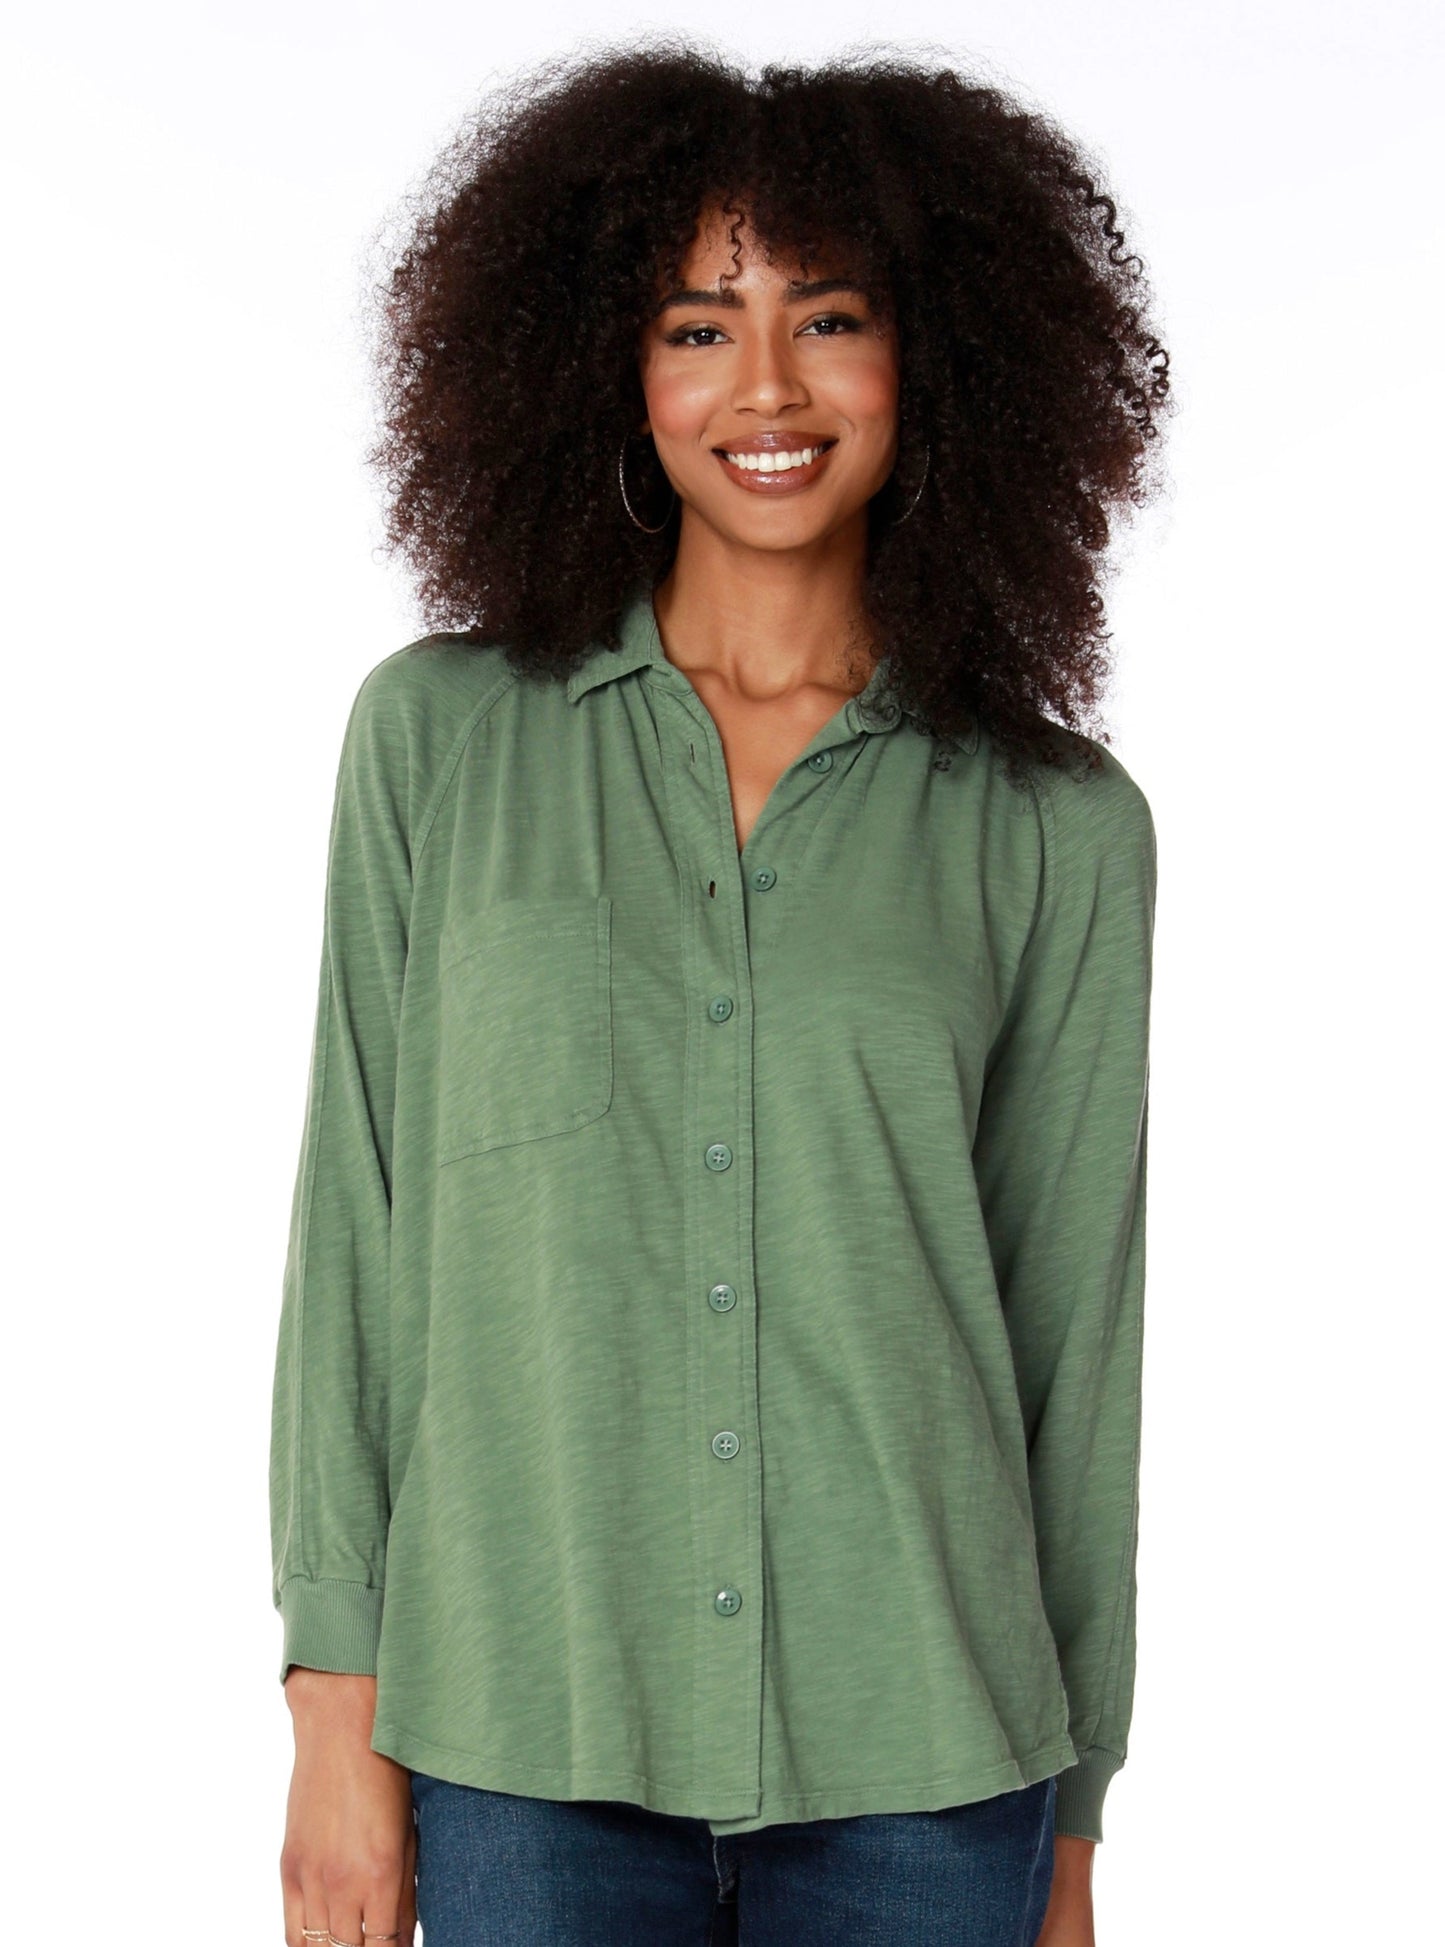 Bobi Button Front Raglan Top in Sprout - Size M Available